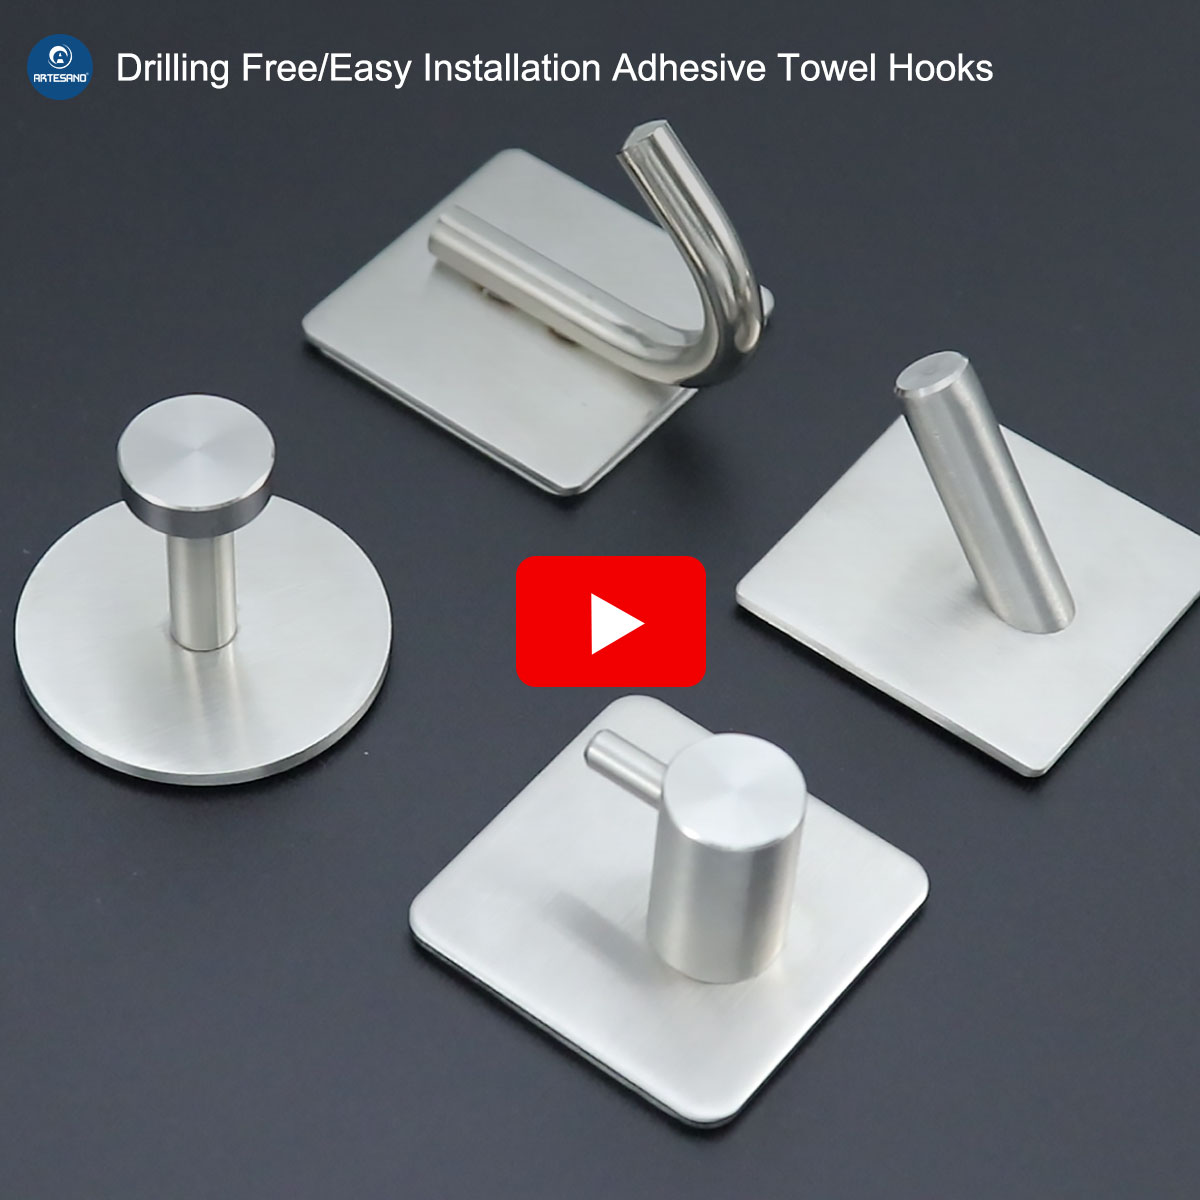 Drilling Free/Easy Installation Adhesive Towel Hooks